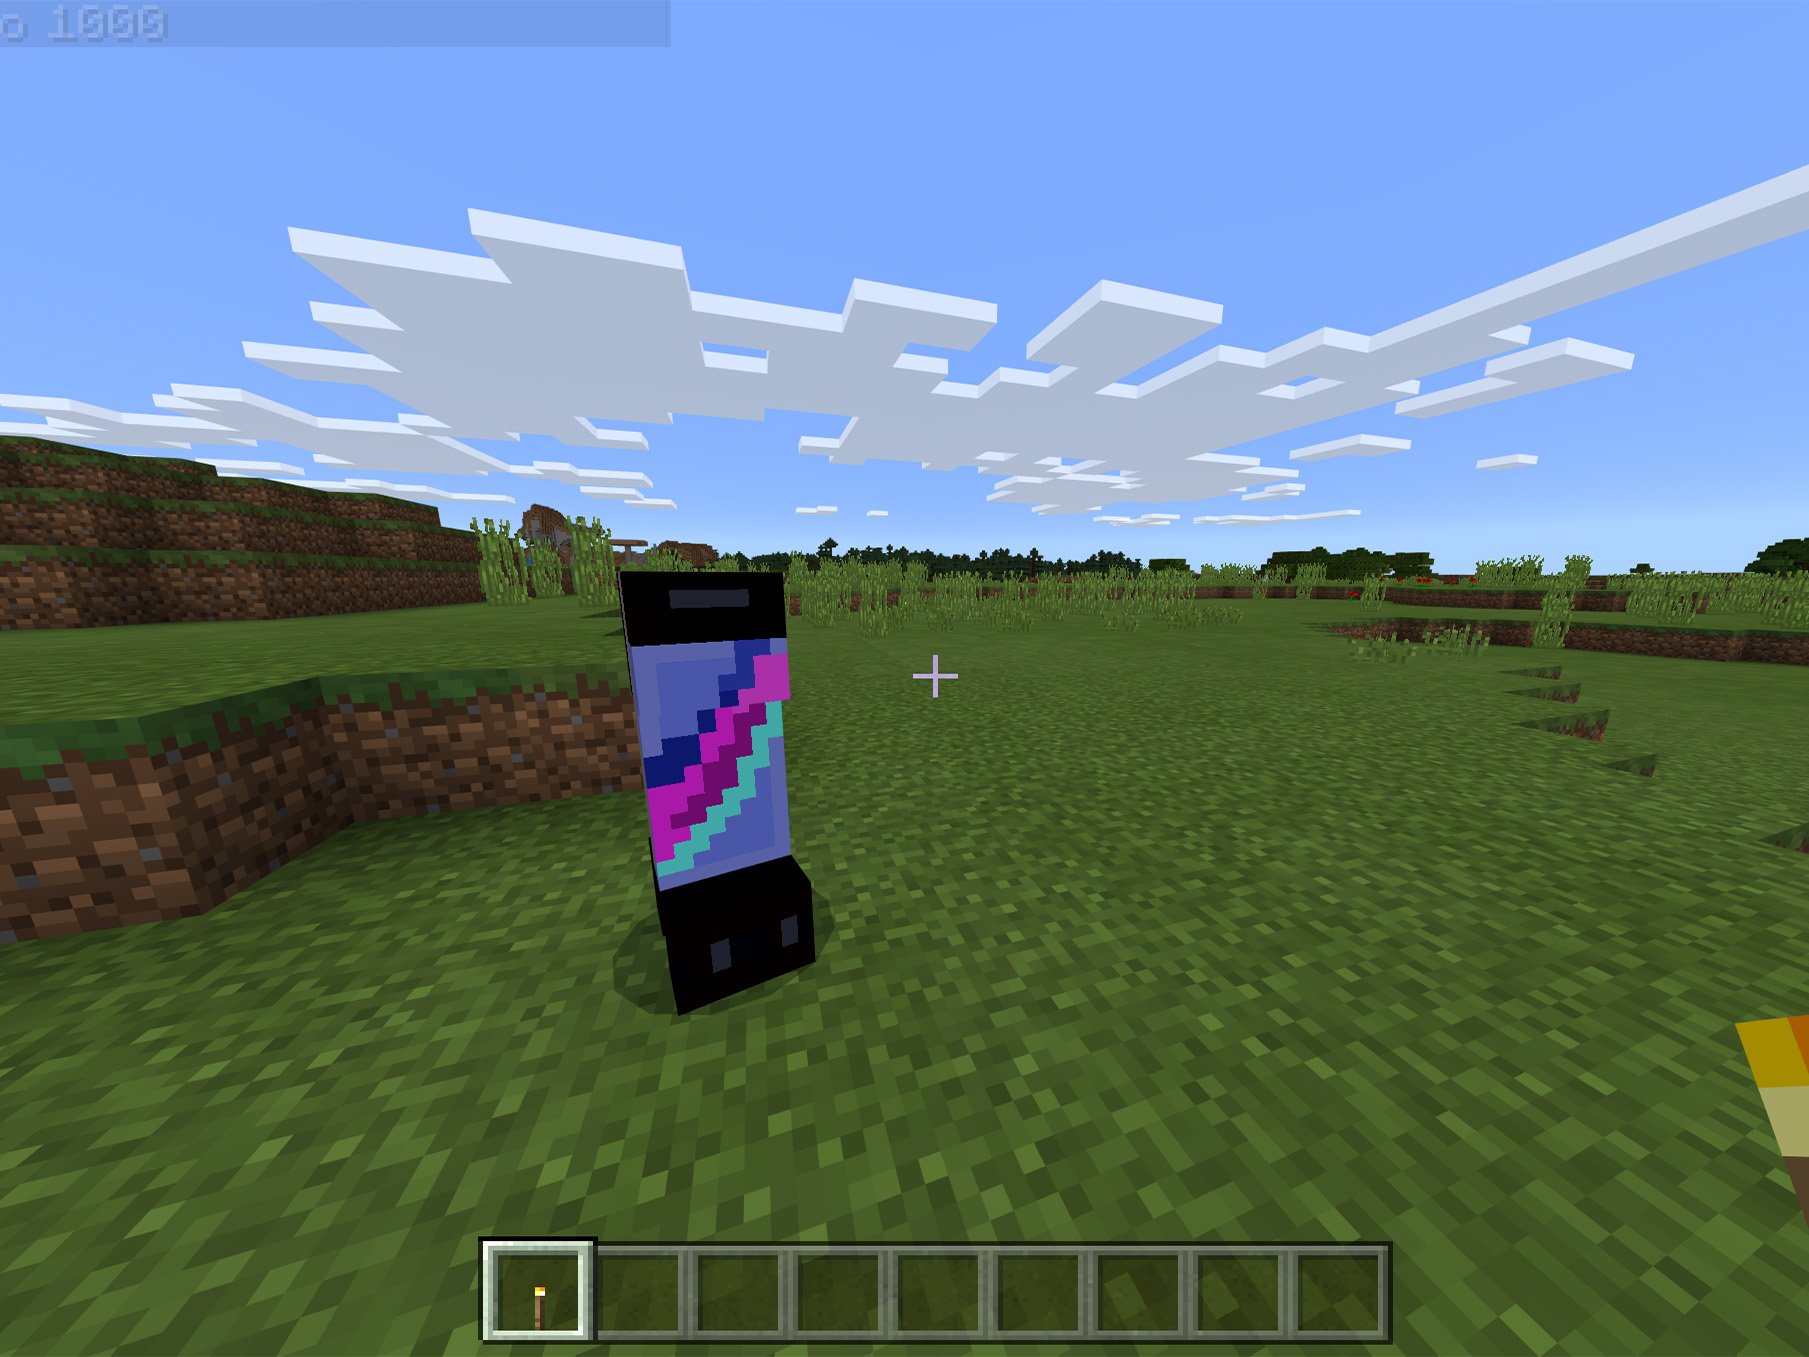 Minecraft: Education Edition – How to add a custom skin on android